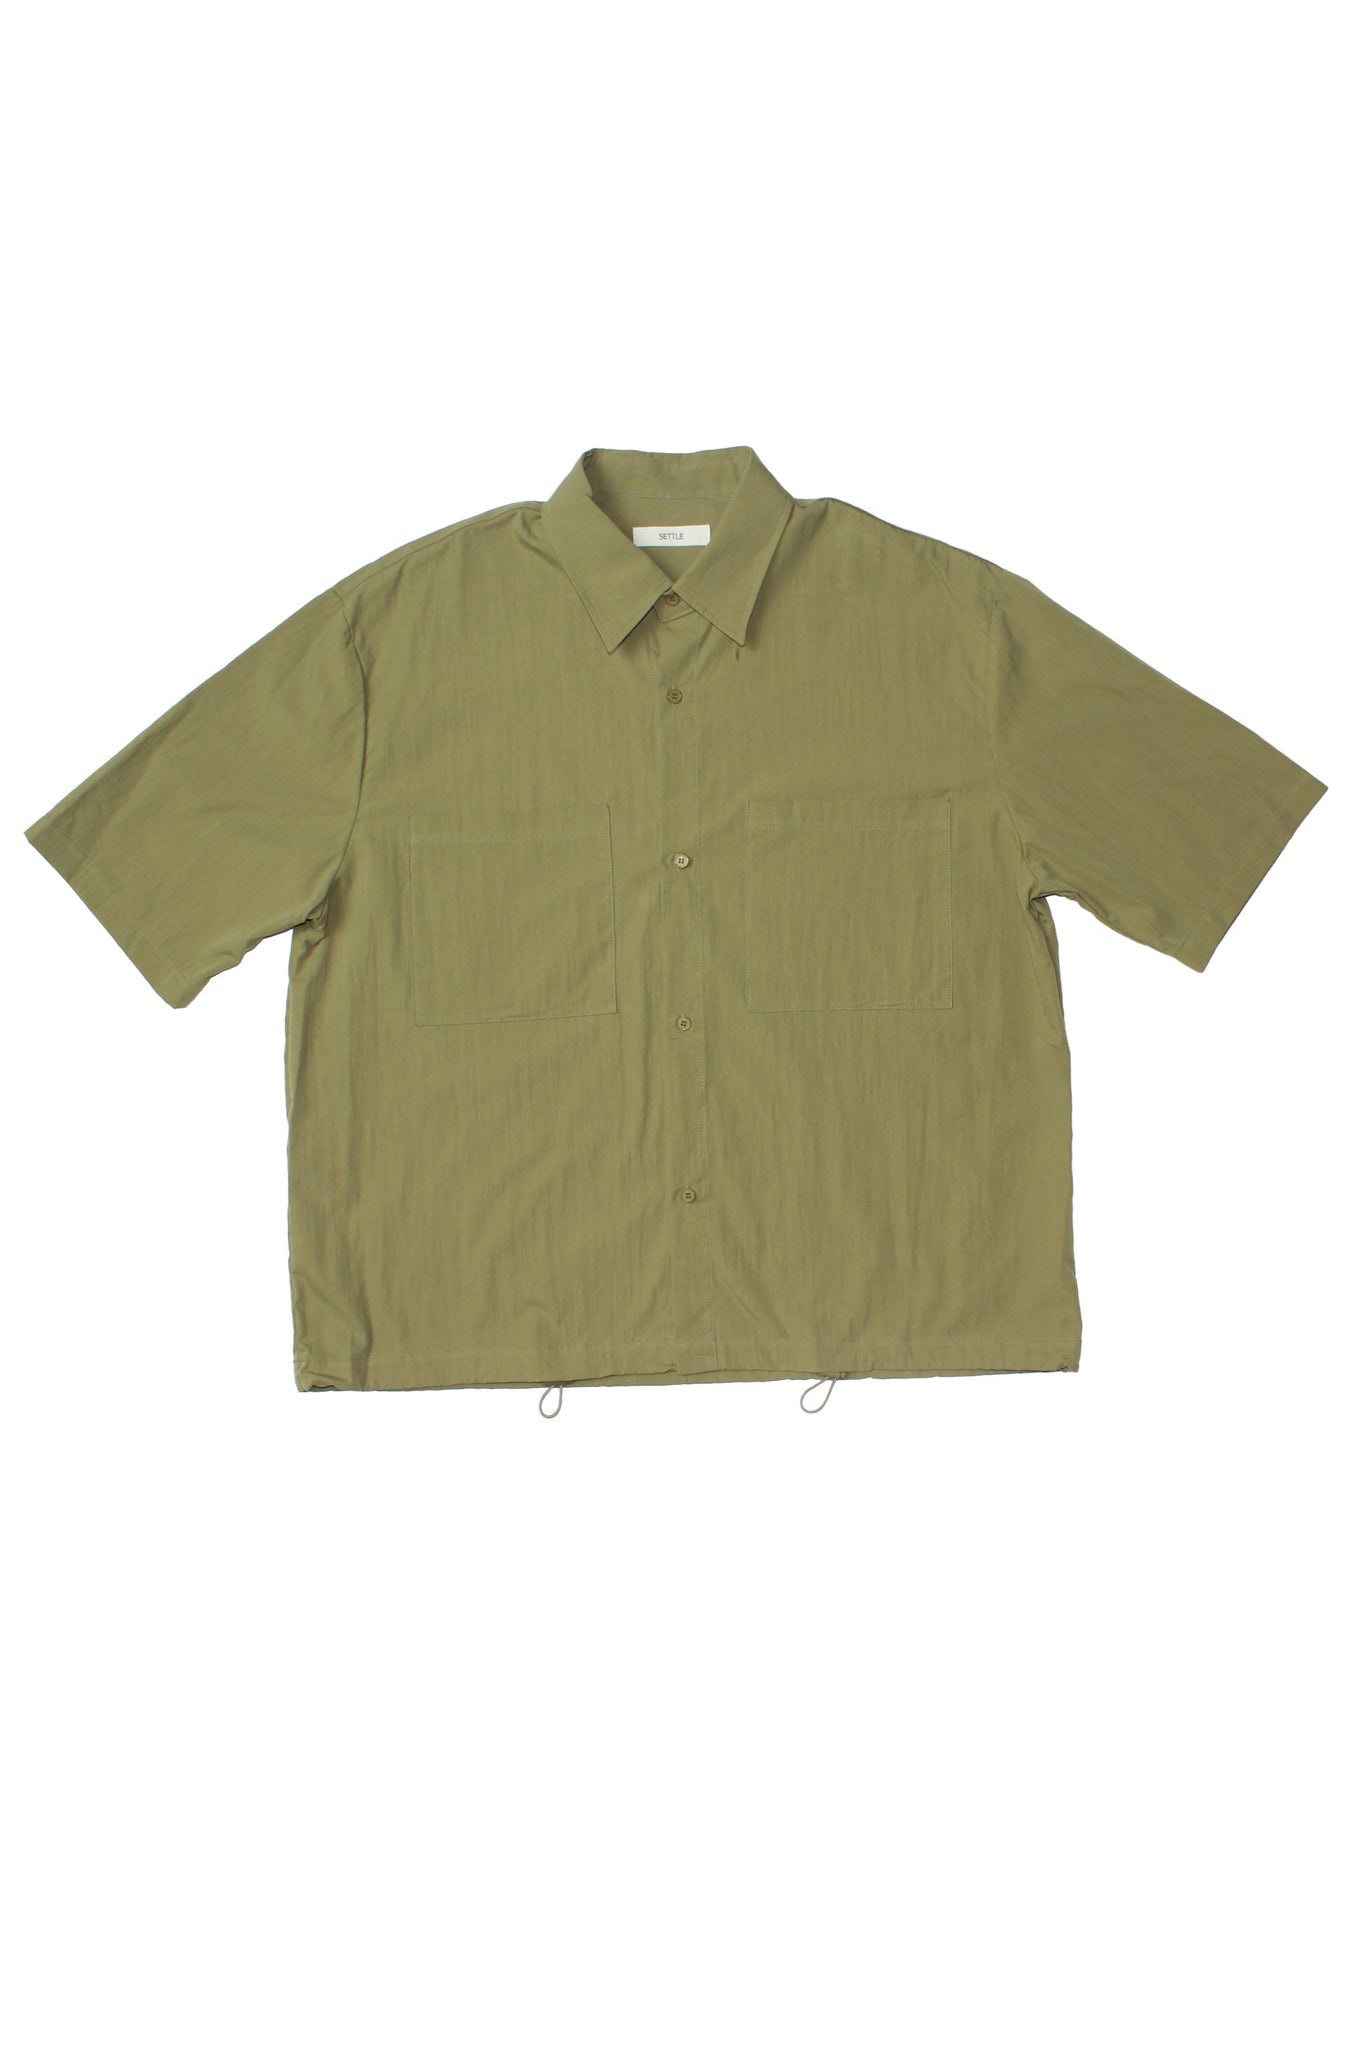 Two Pocket String Shirts in Green